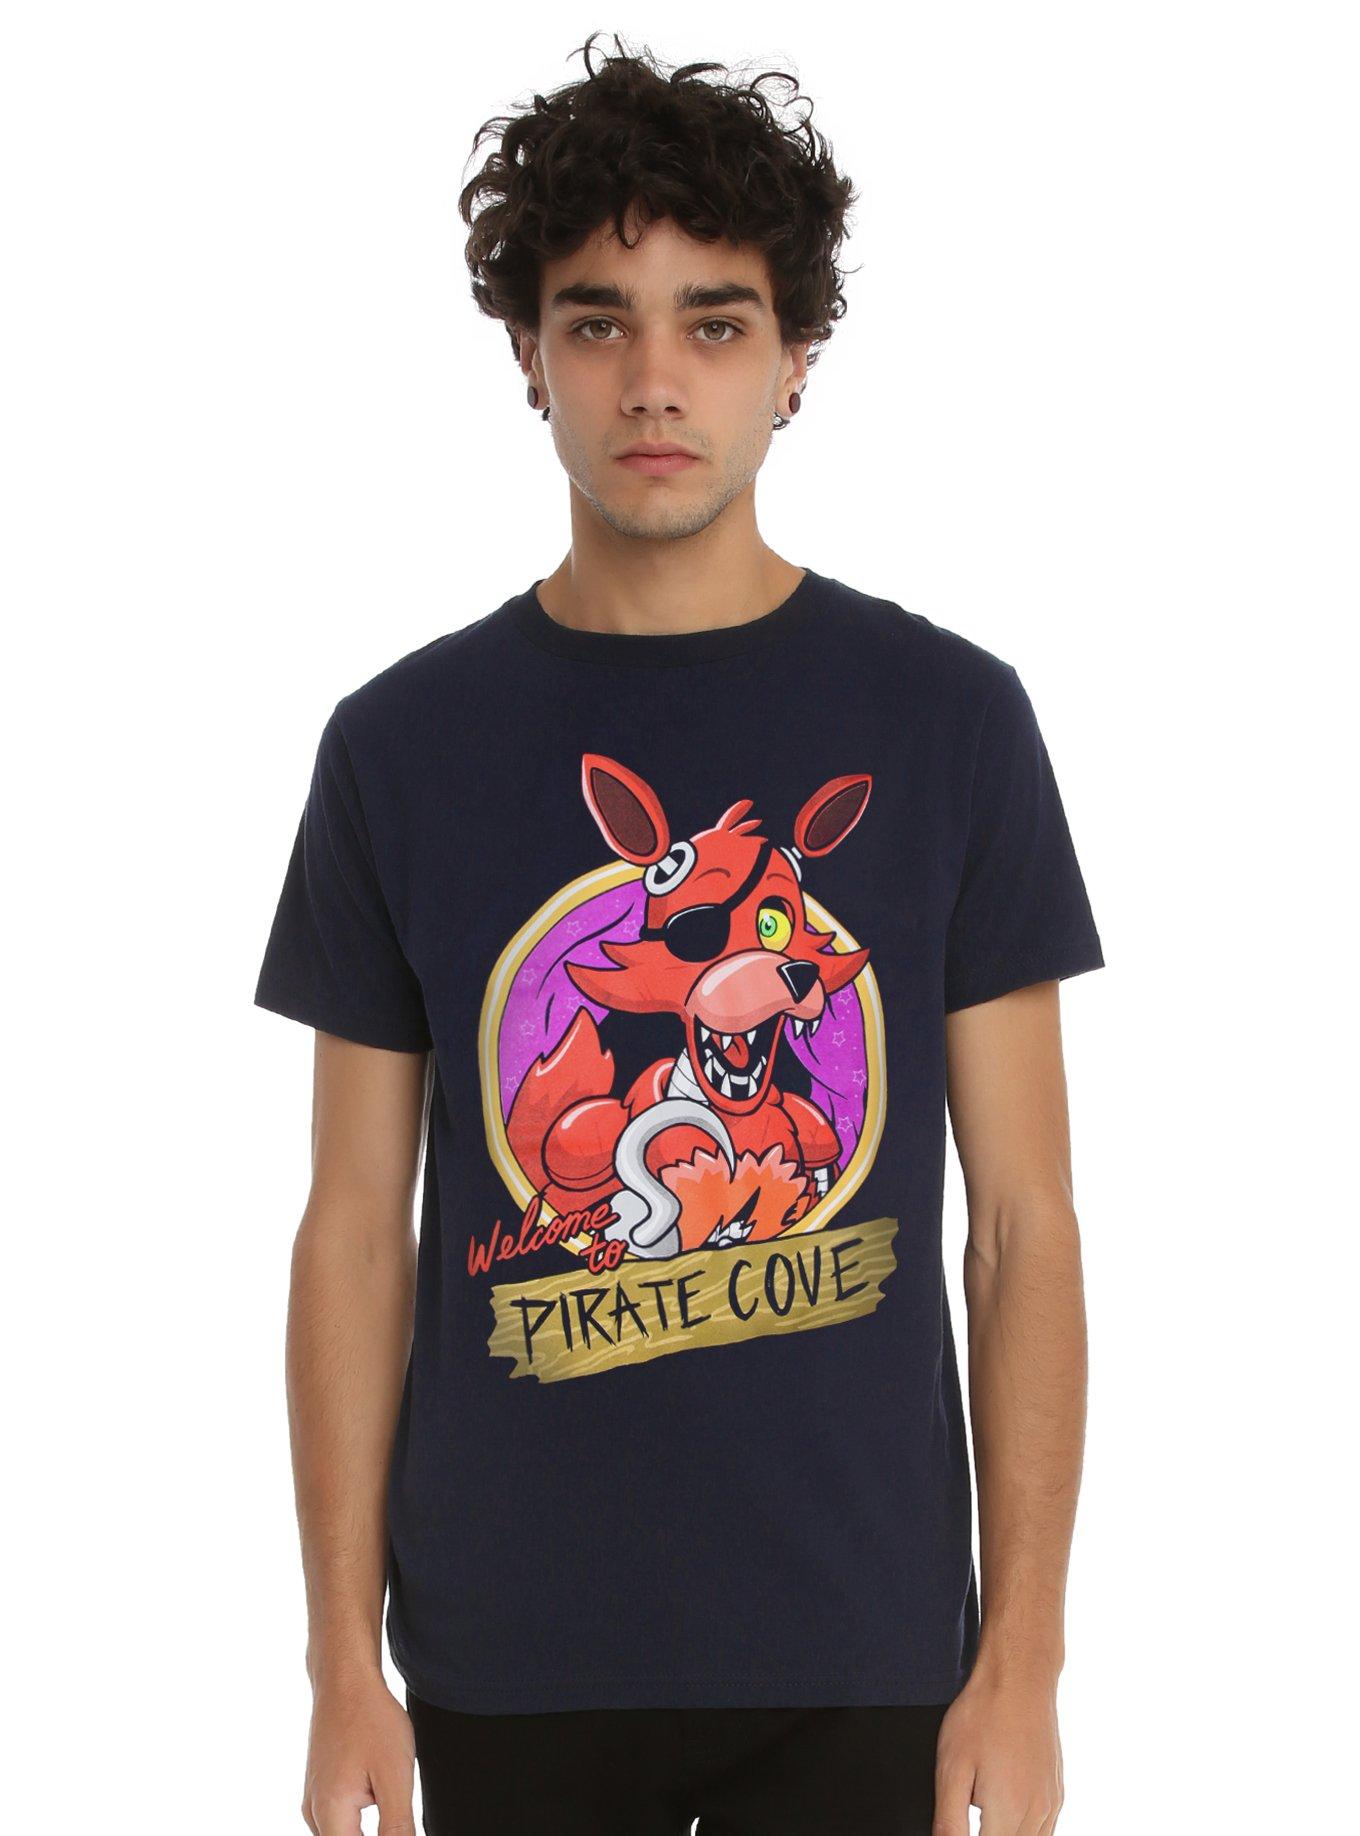 Five Nights At Freddy\'s Welcome To Pirate Cove T-Shirt | Hot Topic